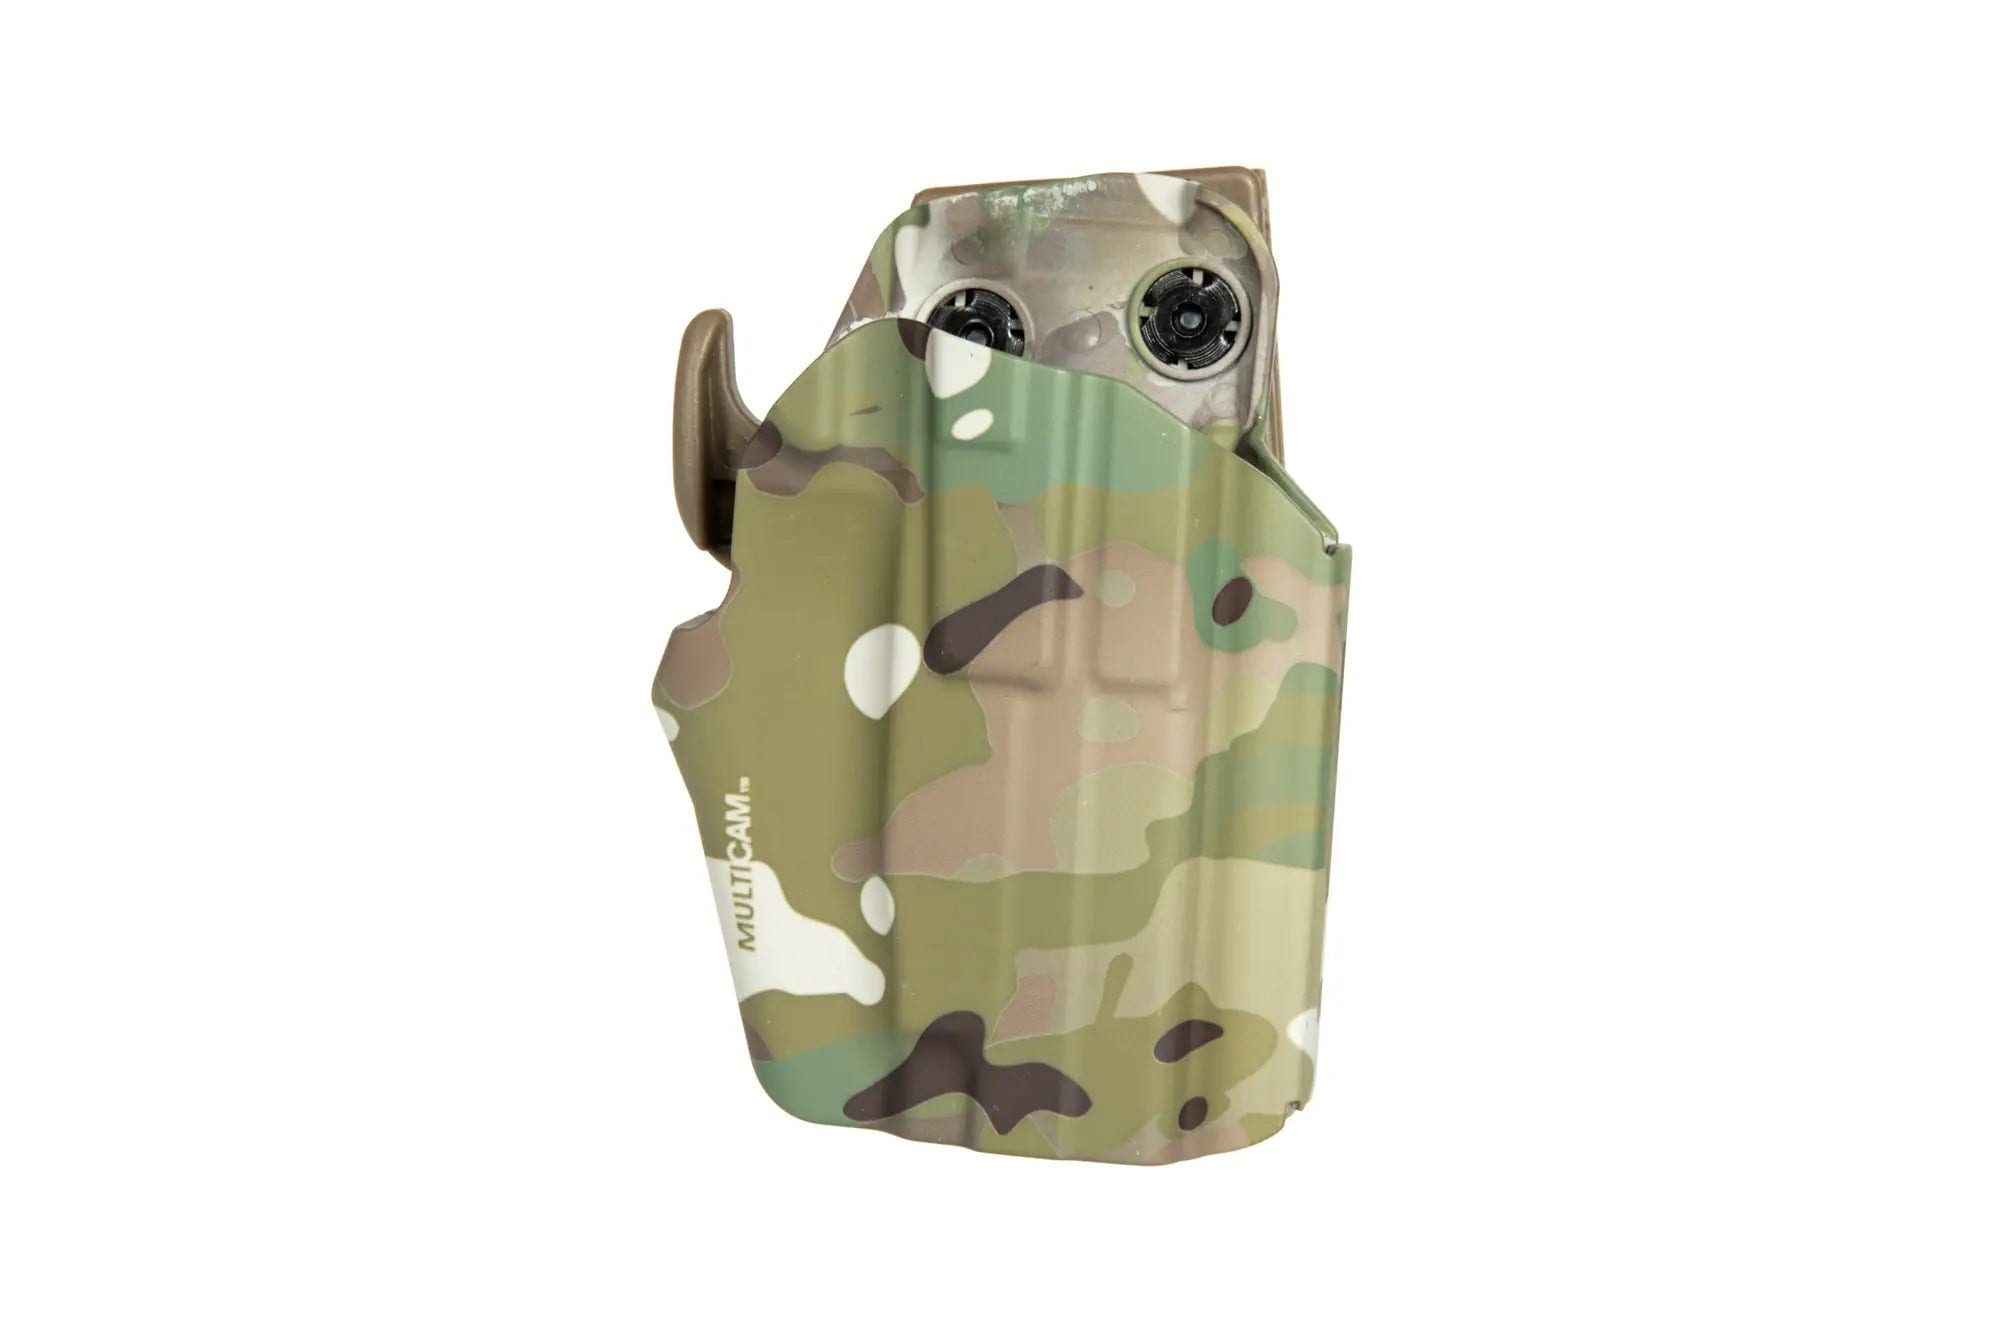 Universal Holster Sub-Compact (183) - Multicam